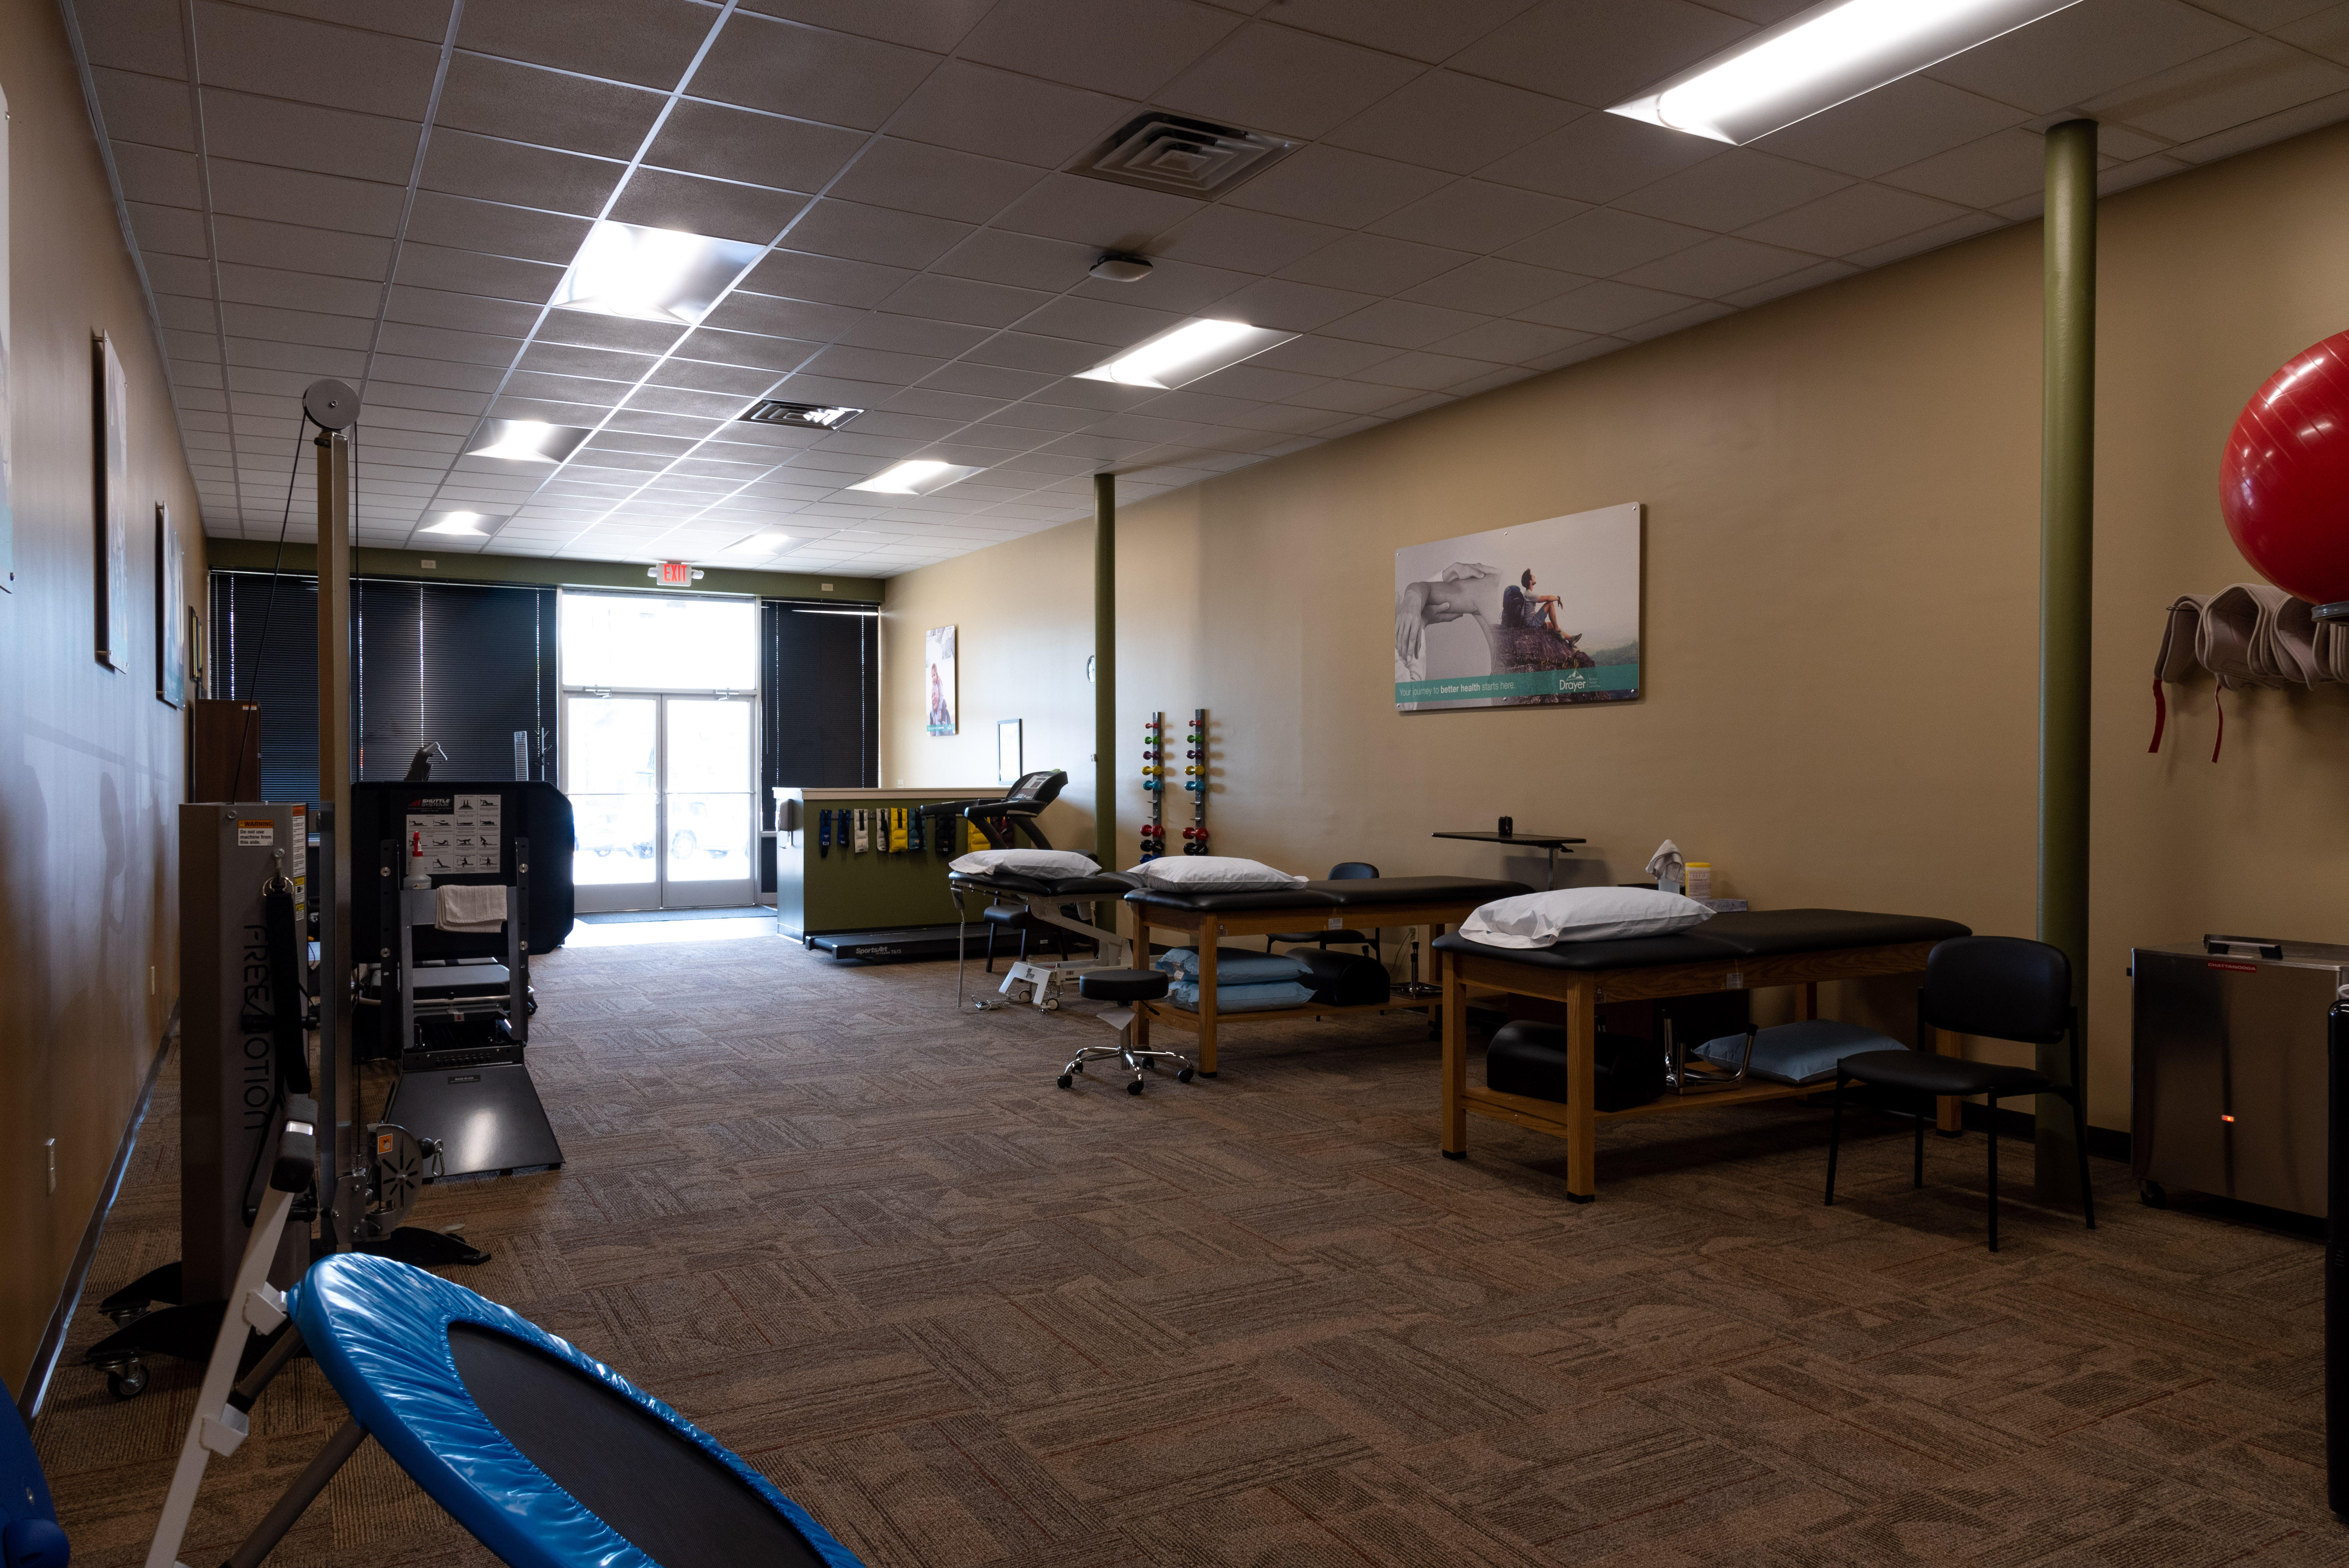 Image 5 | Drayer Physical Therapy Institute